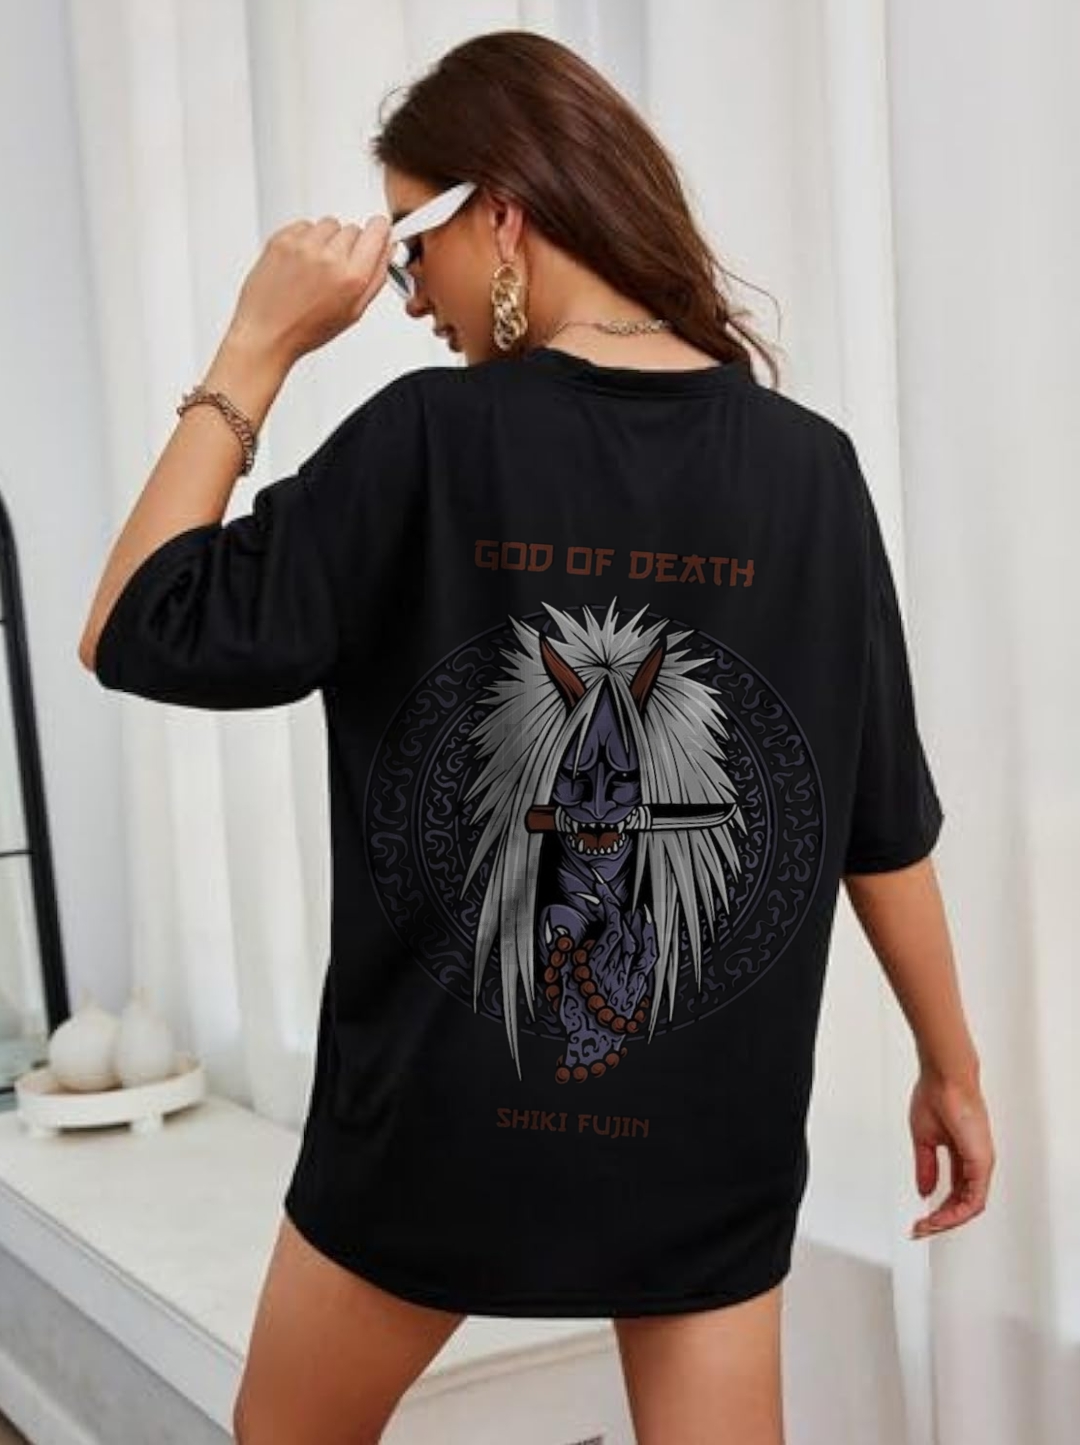 God Of Death Shiki Fujin Printed Unisex Oversized Classic T-Shirt By MeltedSmile Unisex Oversized Tshirts 100% Cotton Regular Fit Graphic Printed Tshirt , Sizes S,M and L,XL